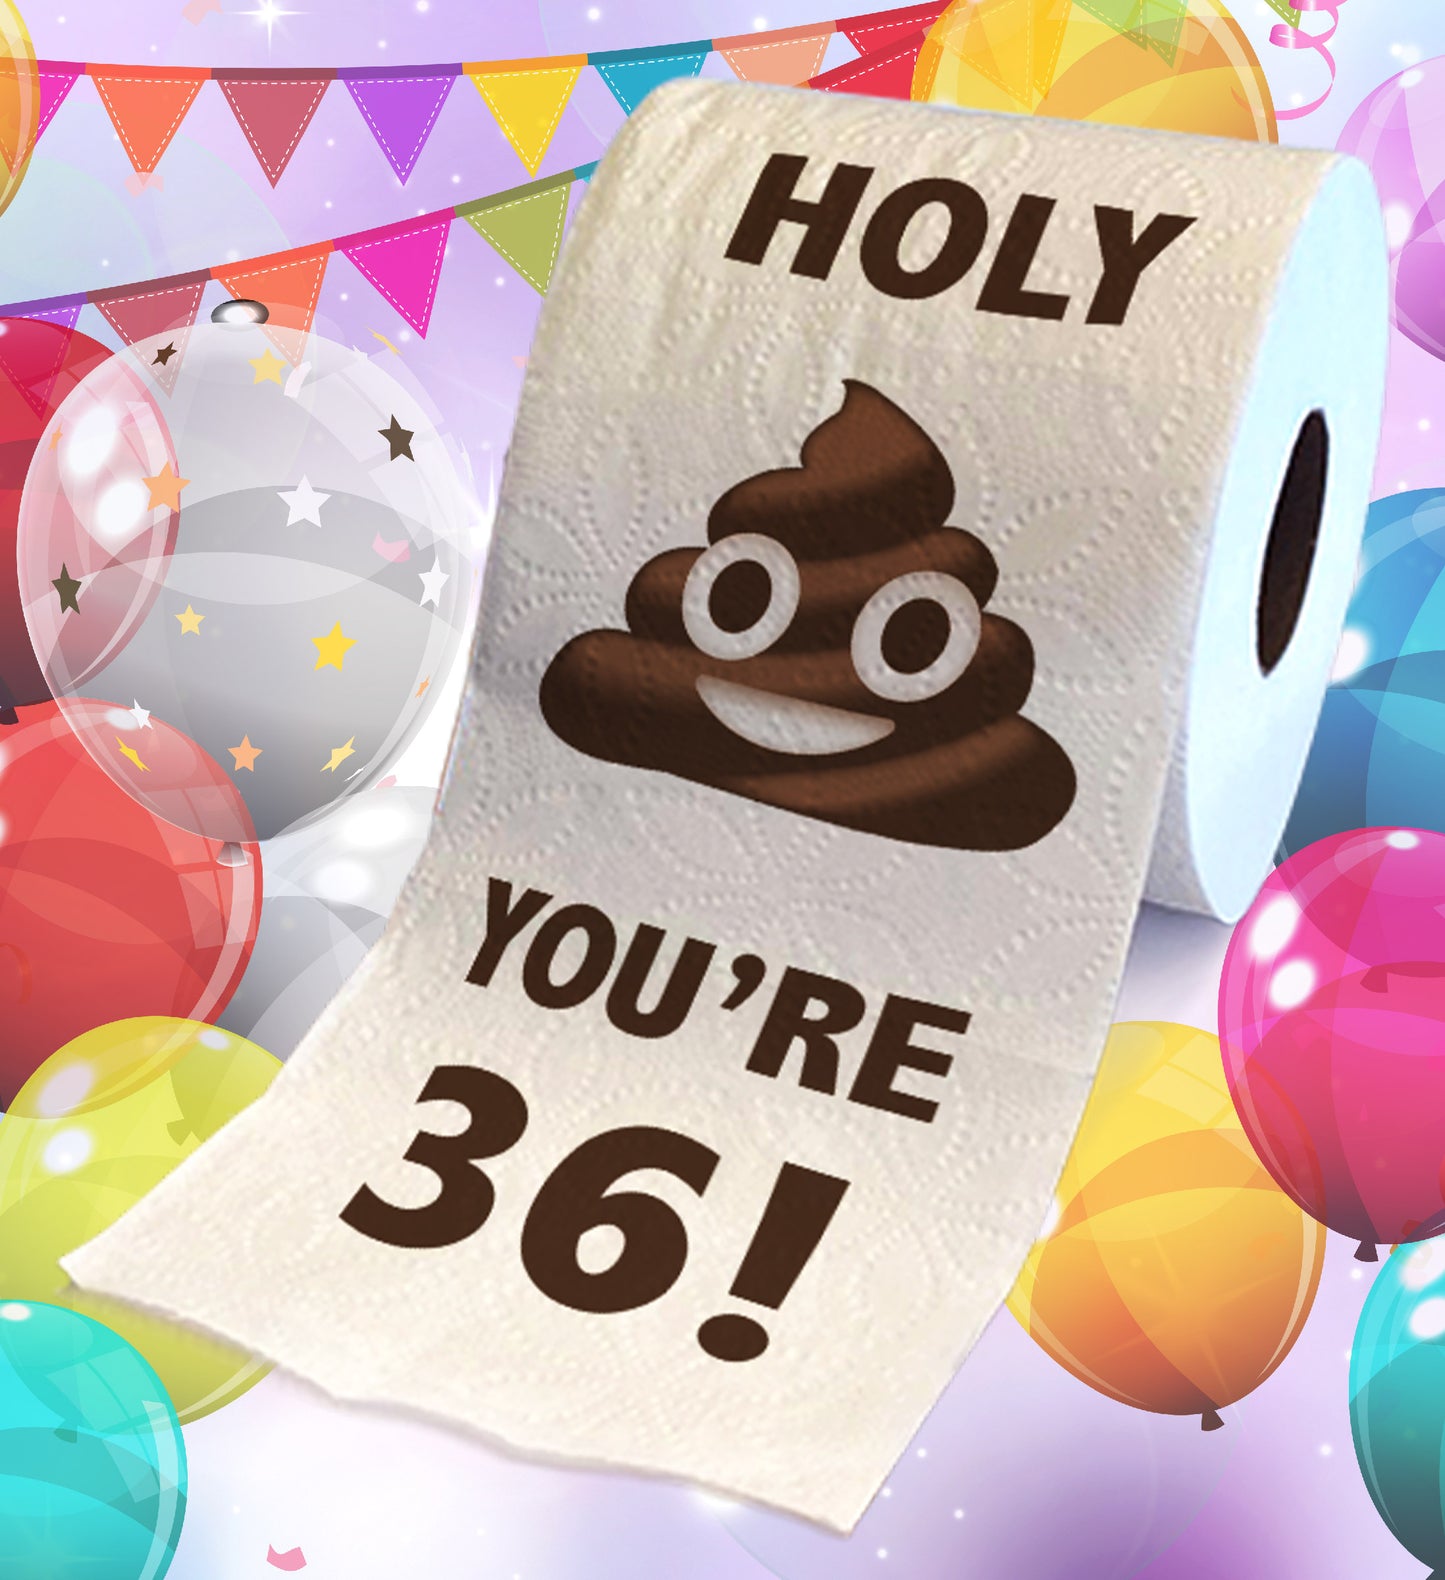 Printed TP Holy Poop You're 36 Funny Toilet Paper Roll Birthday Party Gag Gift